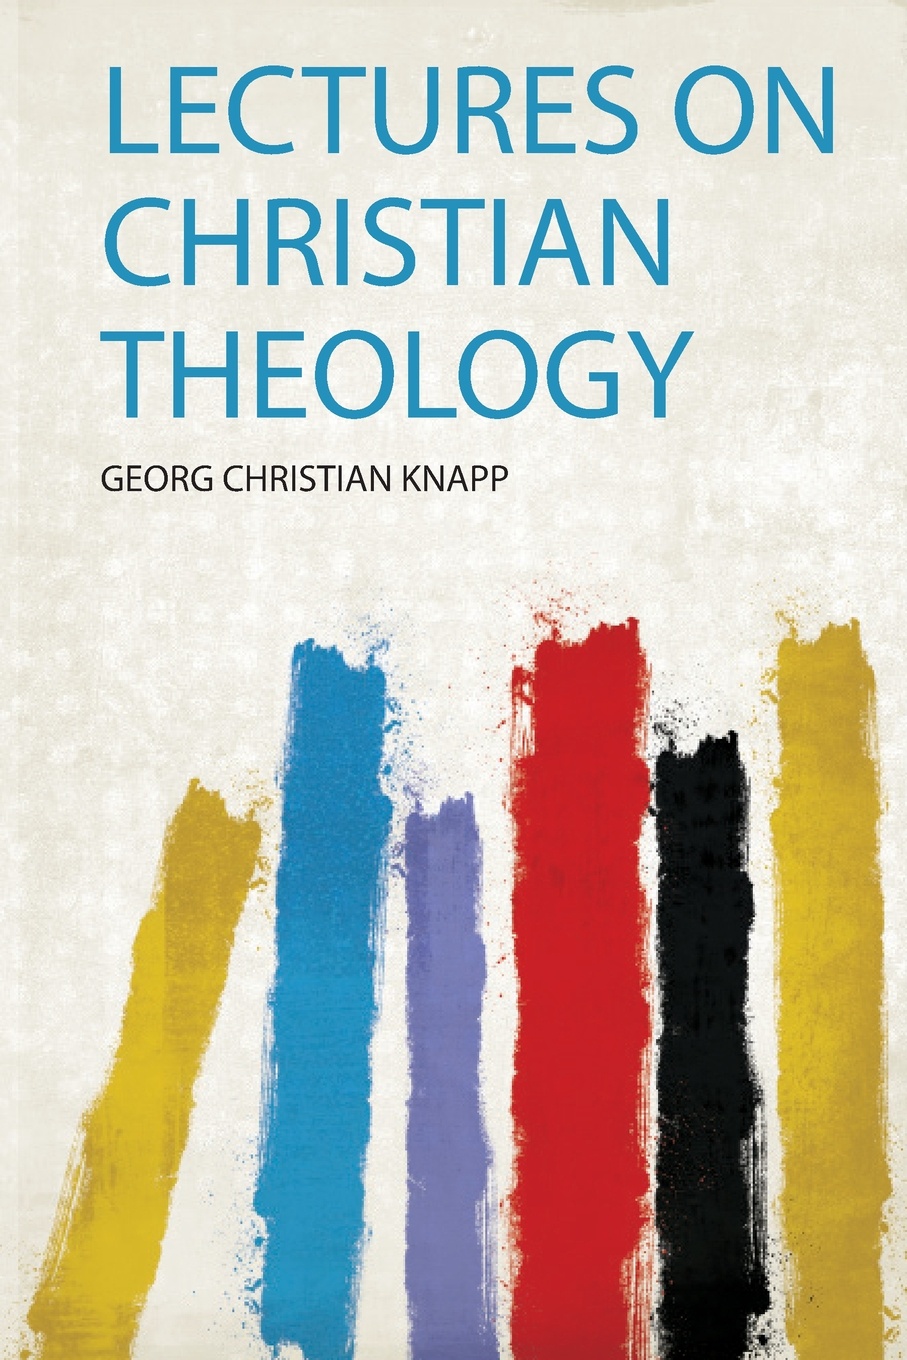 Lectures on Christian Theology